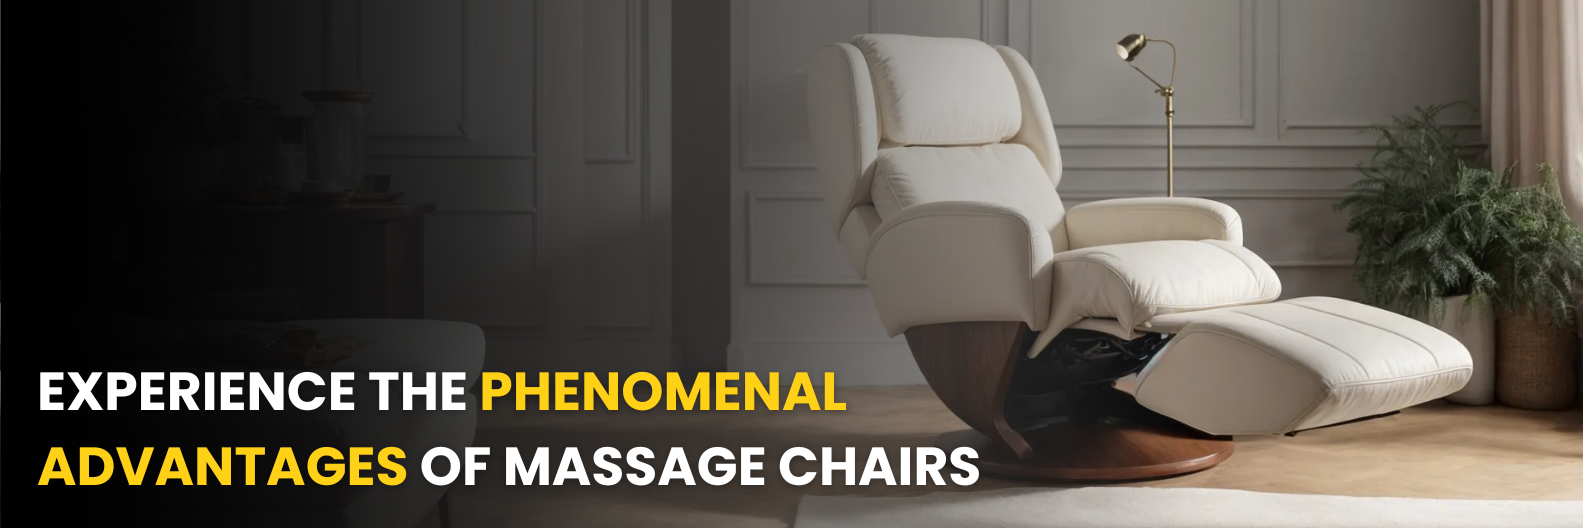 Discover ultimate relaxation and health benefits with our advanced massage chairs – a haven of comfort in your own home.